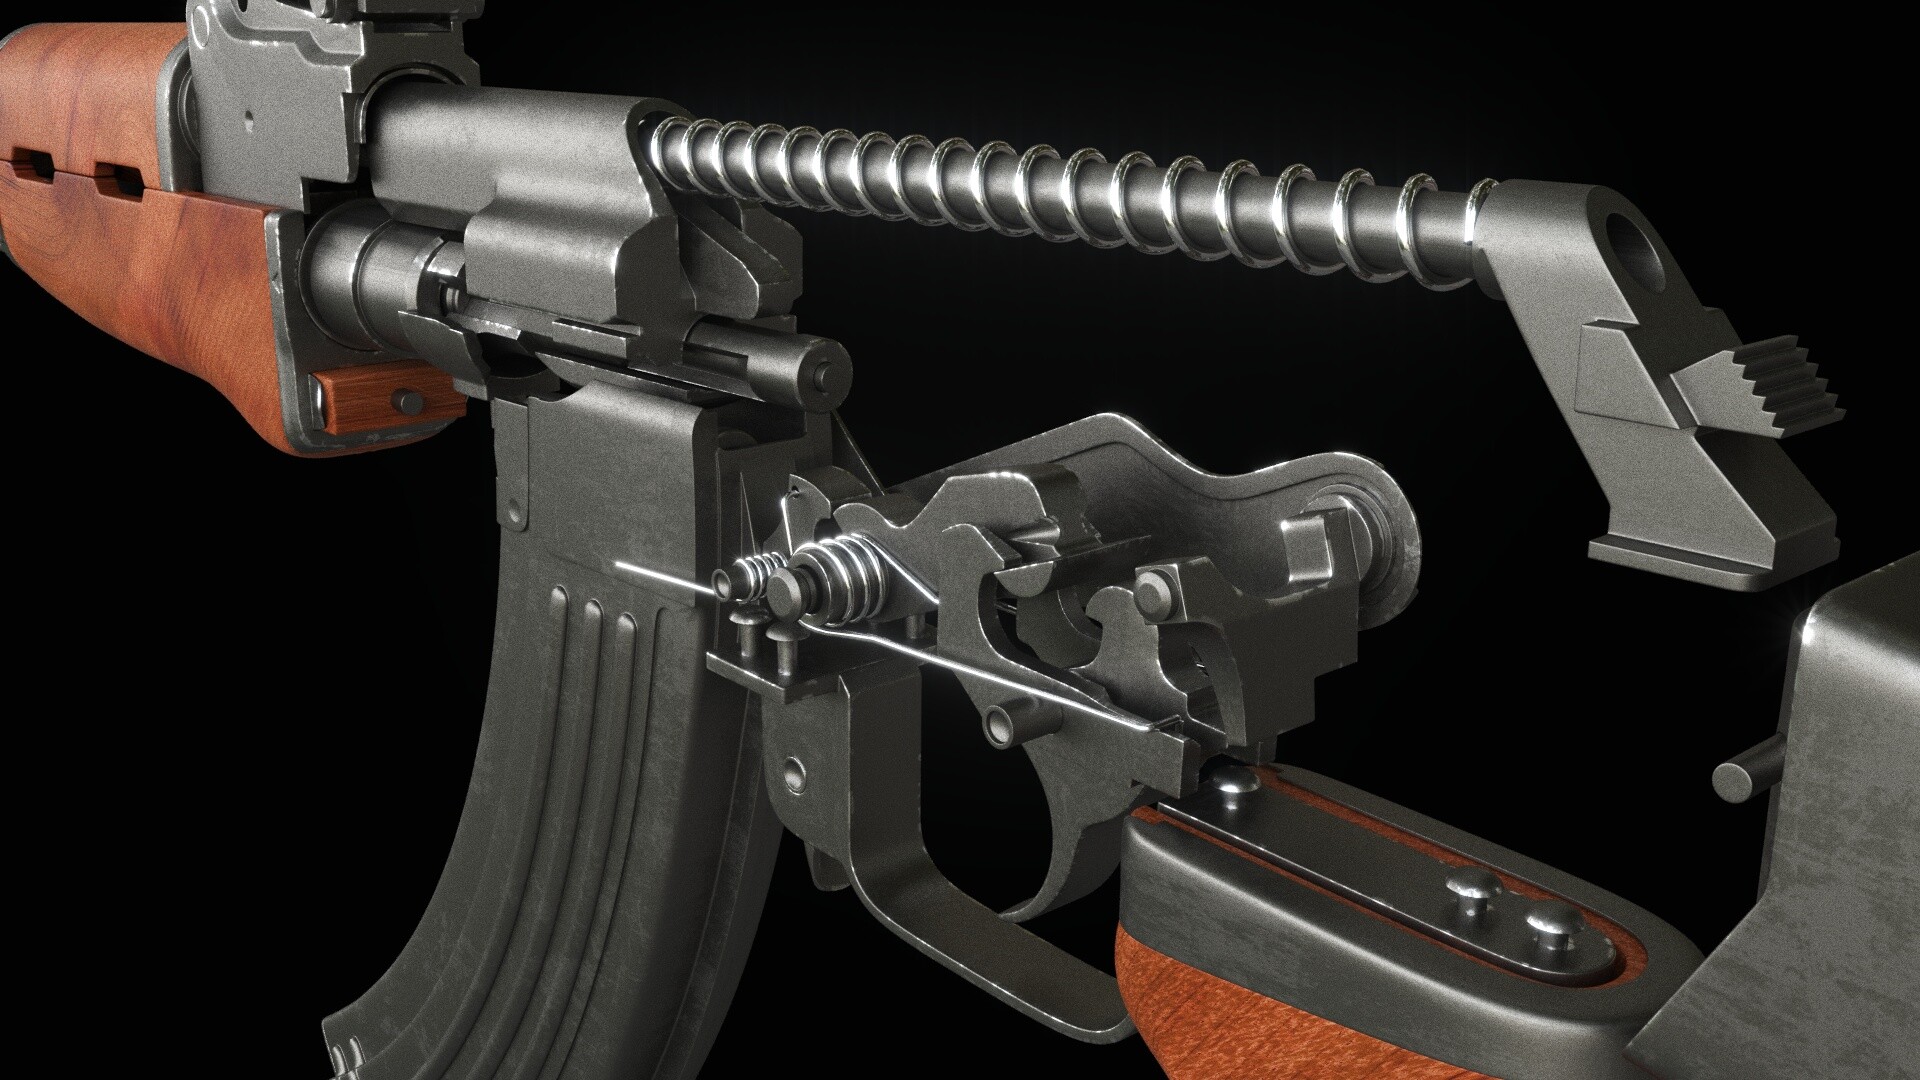 This is how an AK-47 works